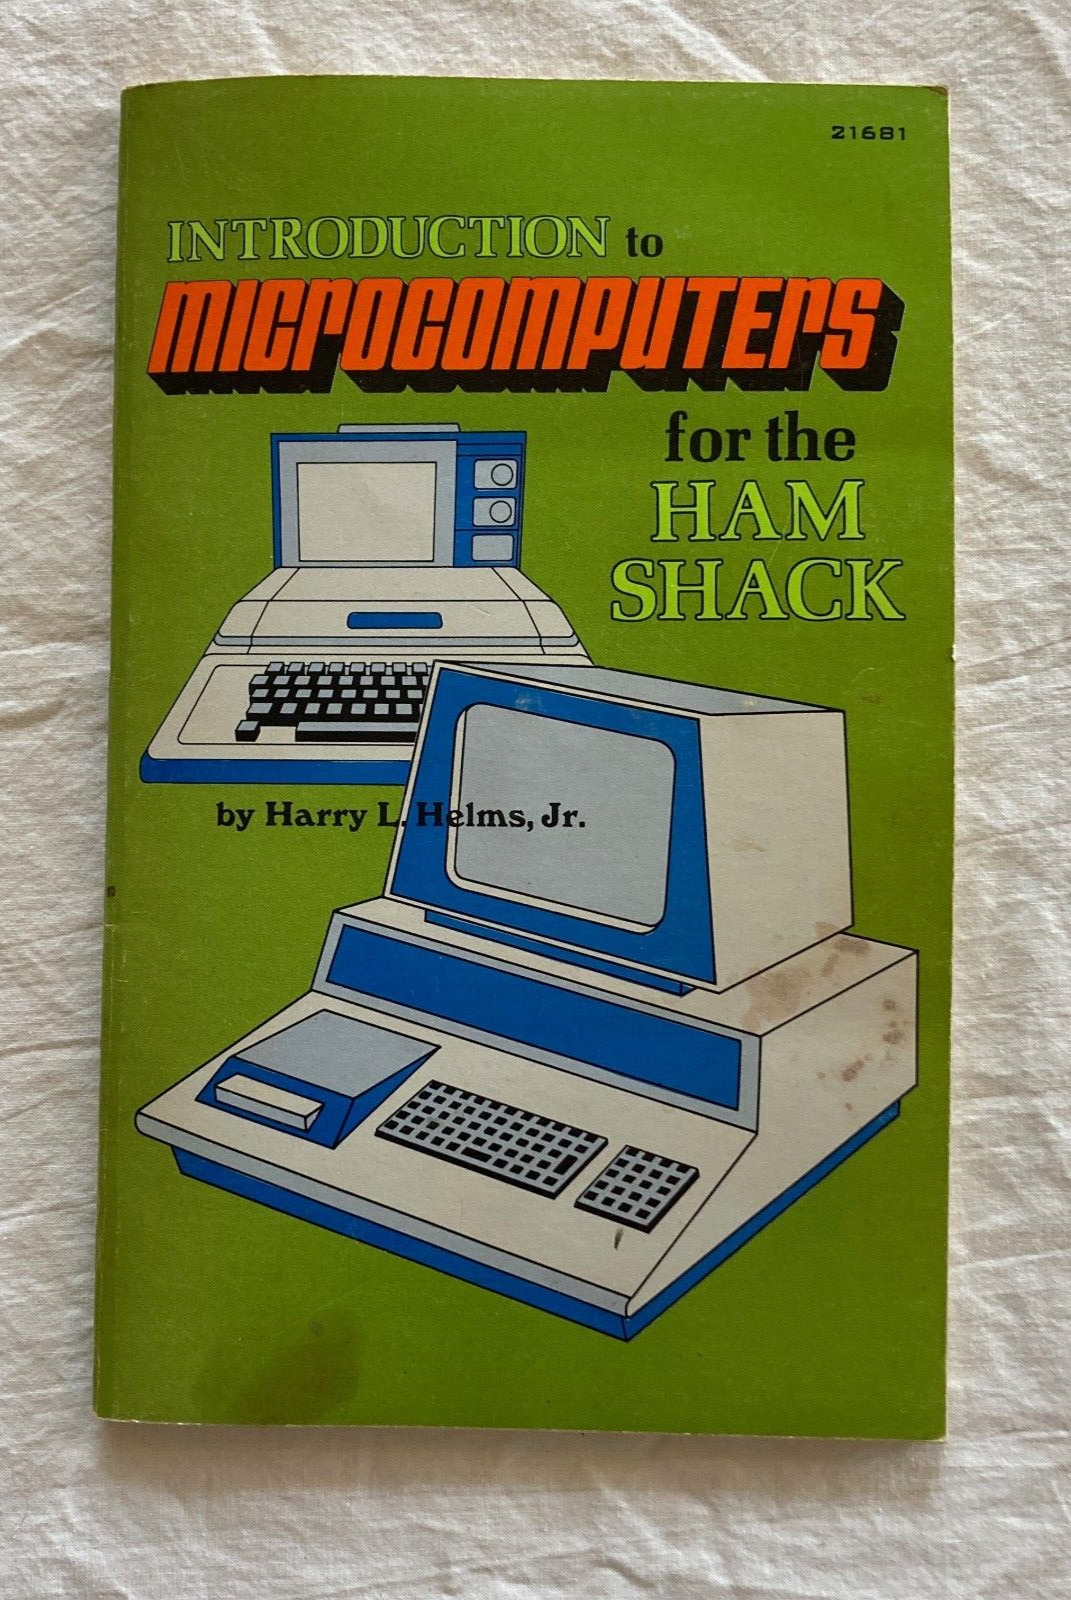 Rare Vintage Microcomputers for the Ham Shack Book Harry Helms Jr 1979 First Ed